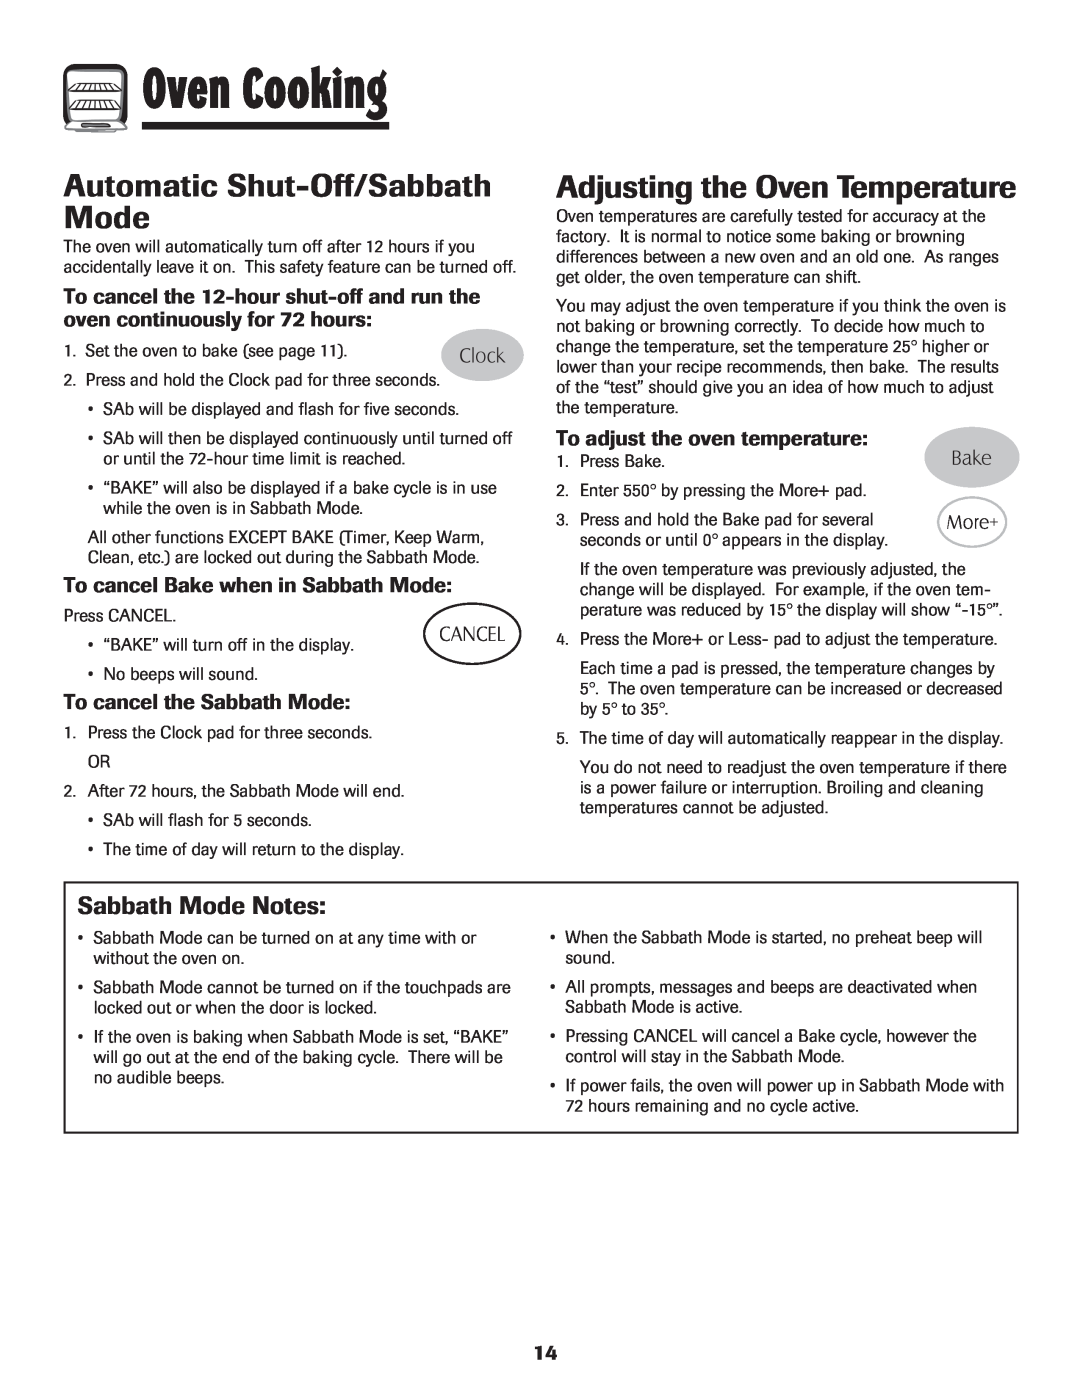 Maytag 8113P424-60 manual Automatic Shut-Off/Sabbath Mode, Adjusting the Oven Temperature, Sabbath Mode Notes, Oven Cooking 